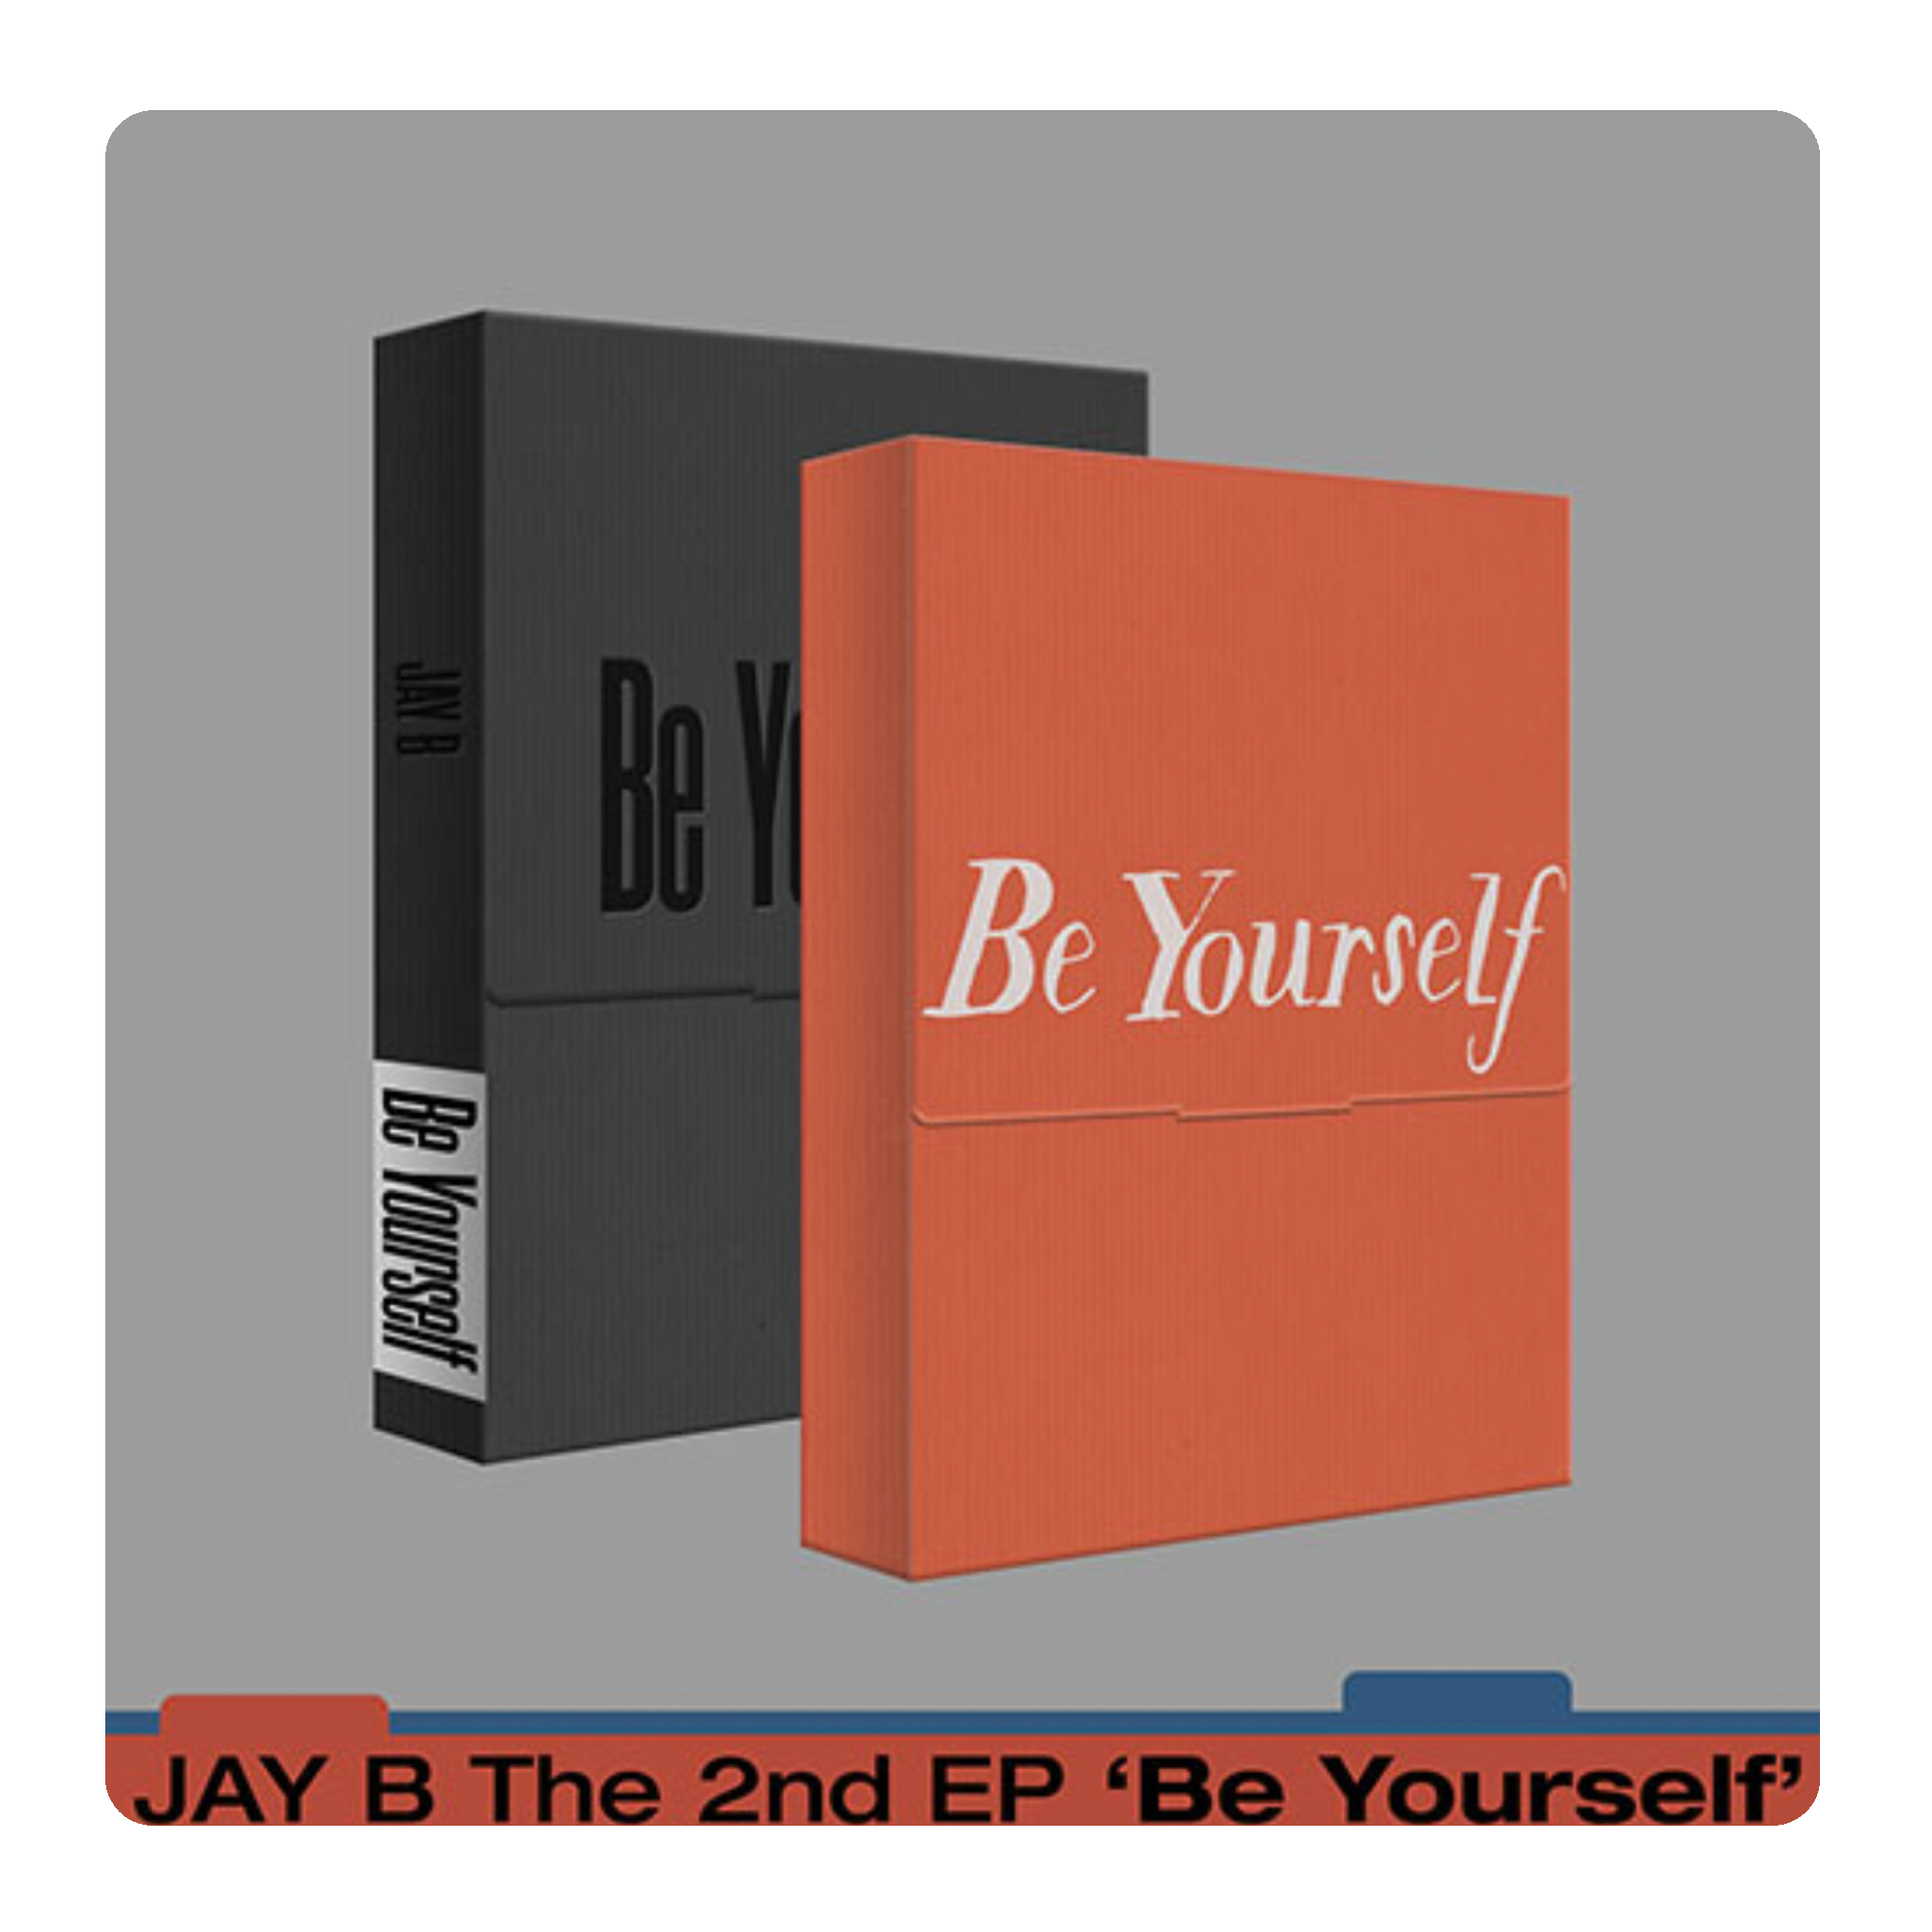 GOT7 JAY B - Be Yourself